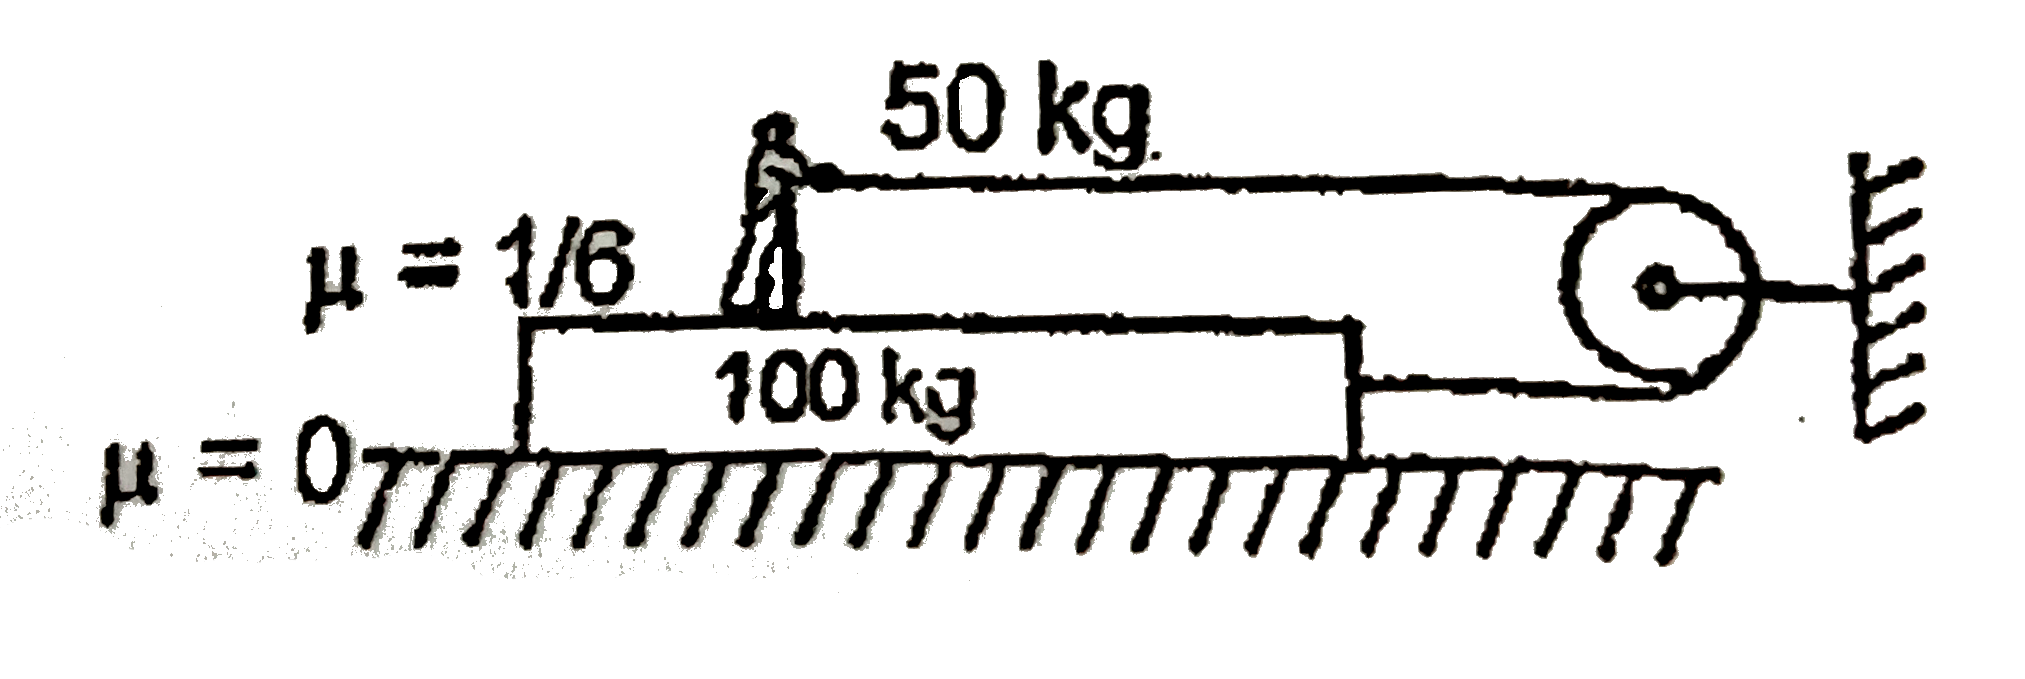 A man of mass 50 kg is pulling on a plank of mass 100 kg kept on a smooth floor as shown with force of 100 N. If both man & plank move together, the force of friction acting on man is (100)/(x)N. What is x ?